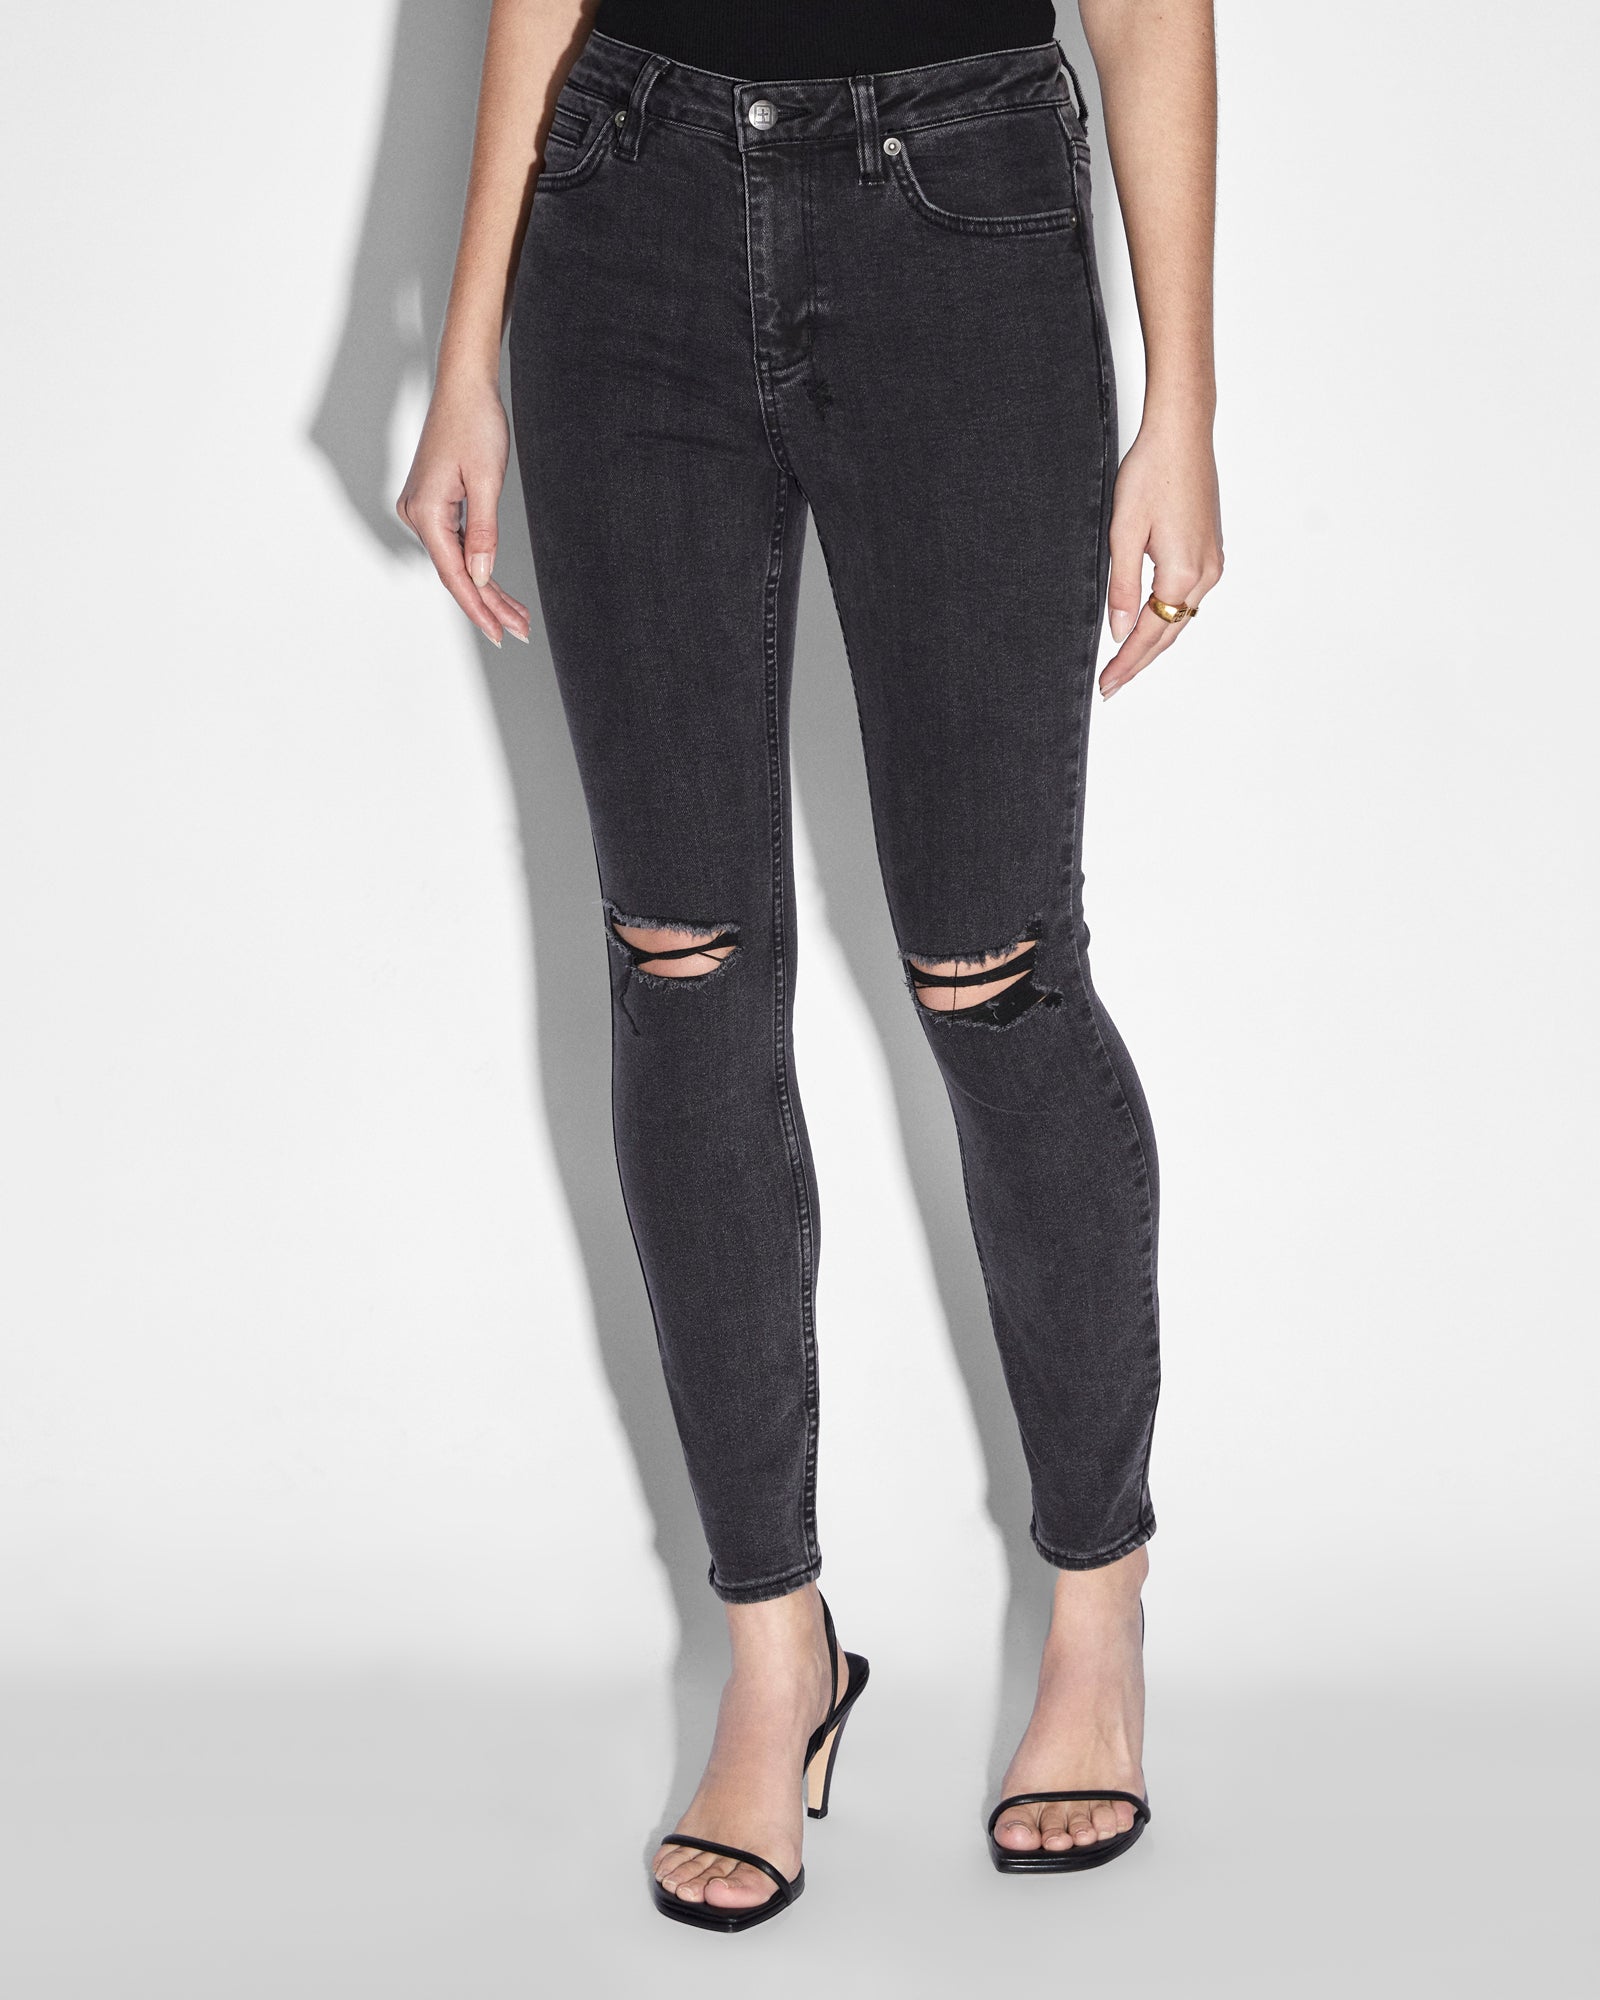 Black Jeans, Black Ripped Jeans for Women